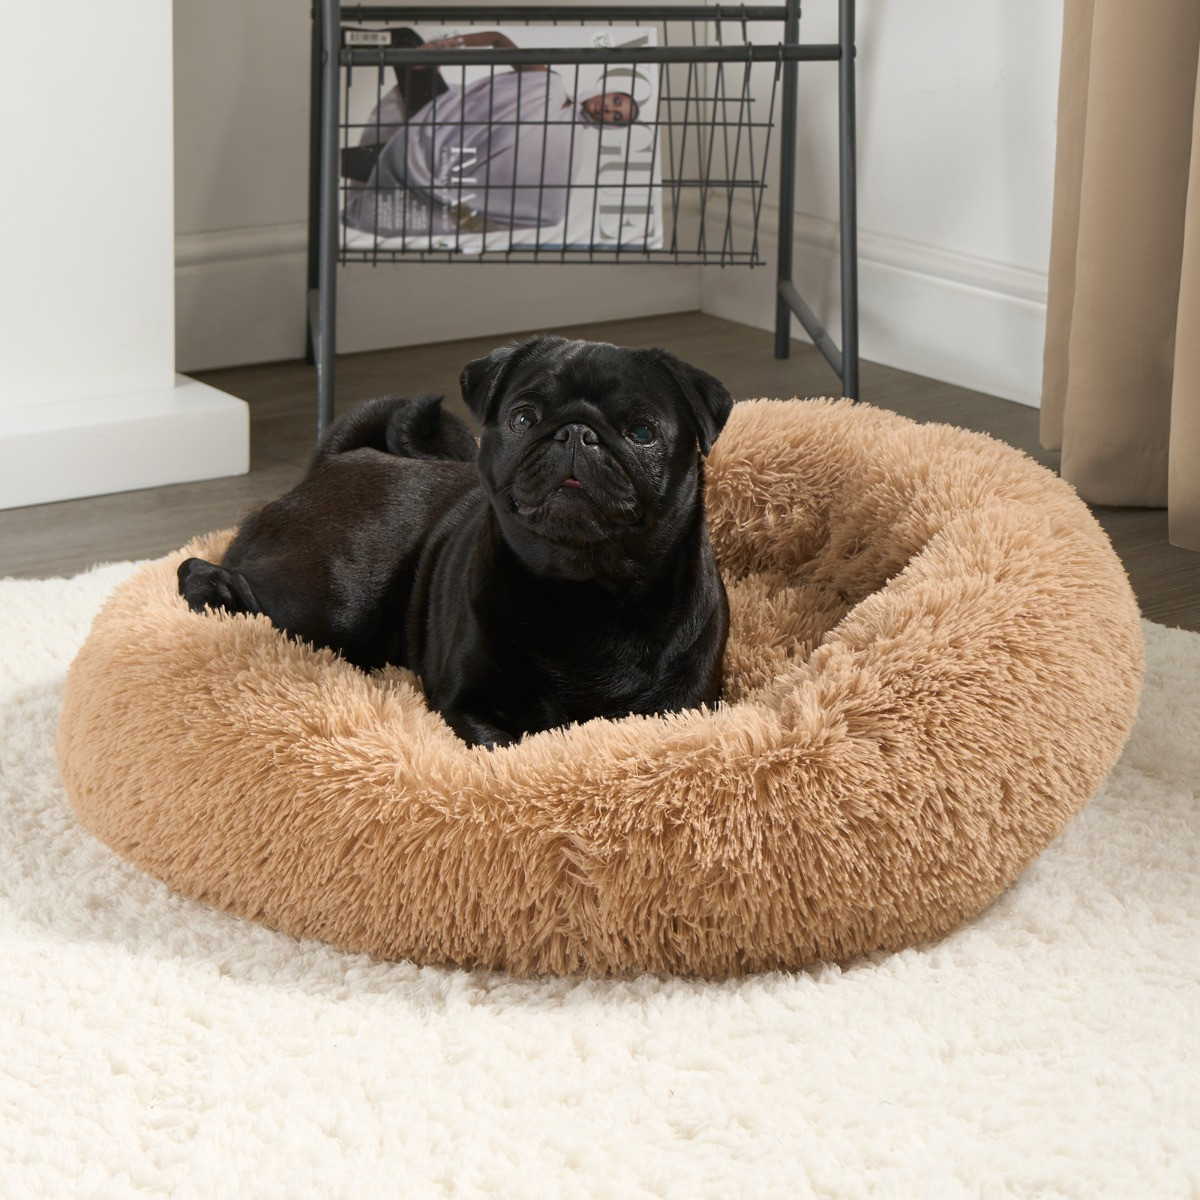 OHS Fluffy Round Calming Pet Bed - Natural>